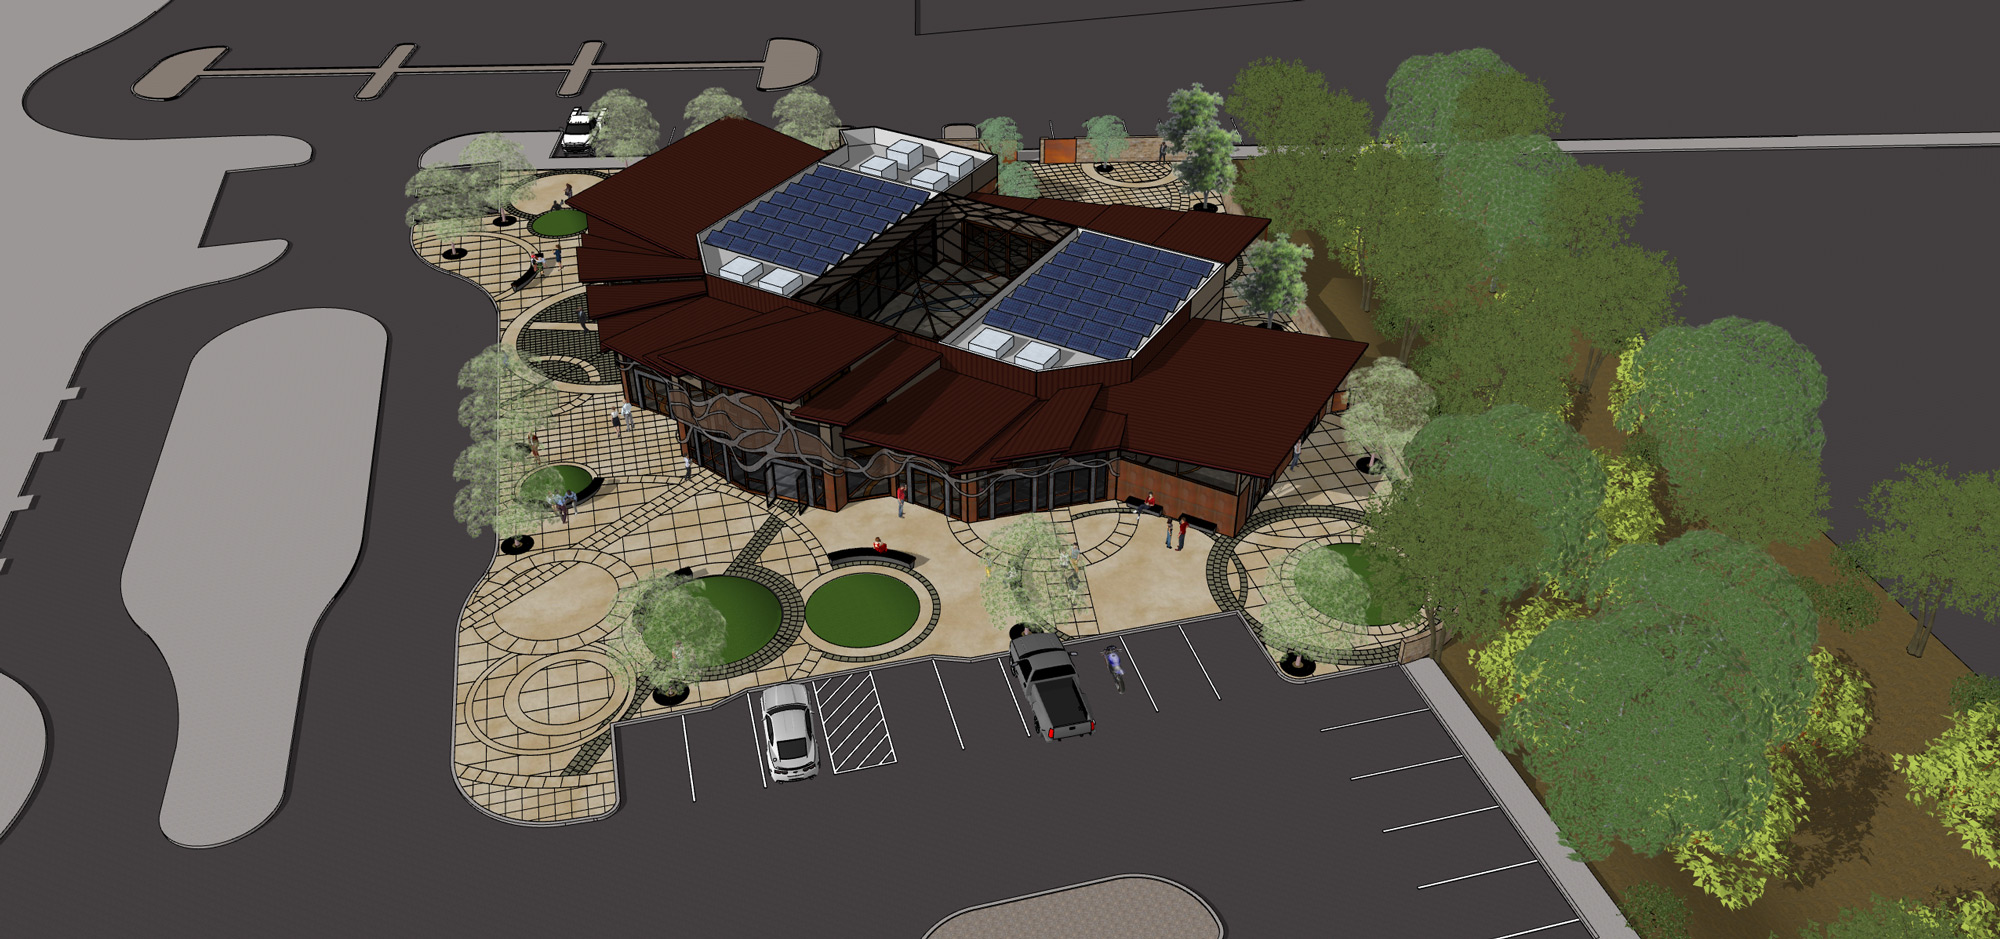 Grover Beach Conference Center Rendering CRSA